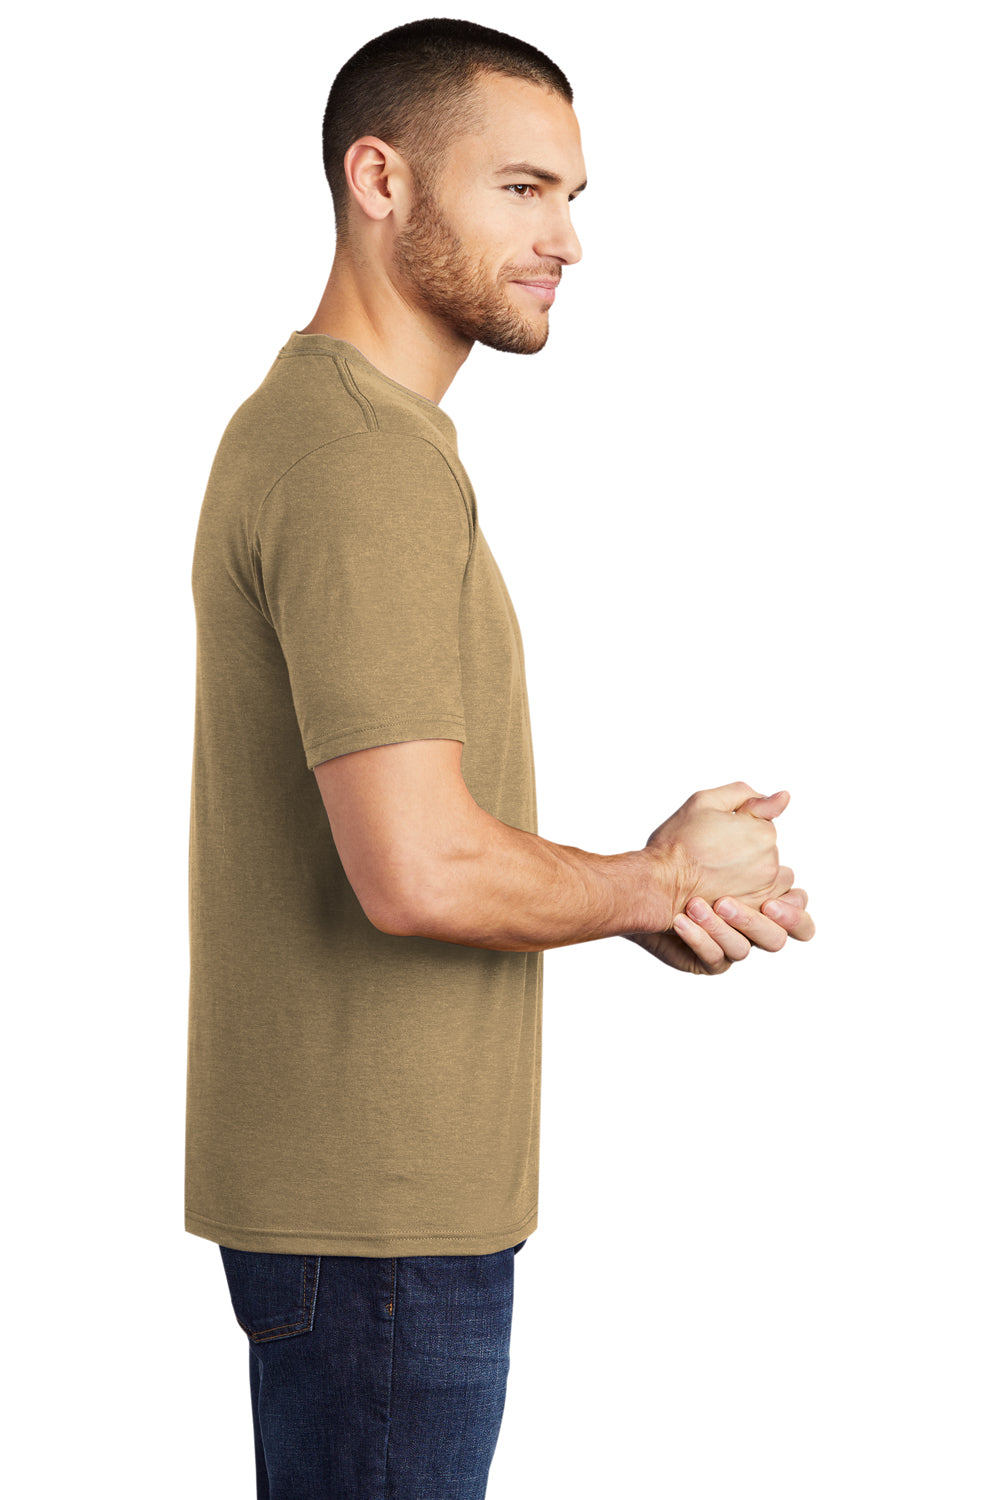 District DM130 Mens Perfect Tri Short Sleeve Crewneck T-Shirt Heather Coyote Brown Side